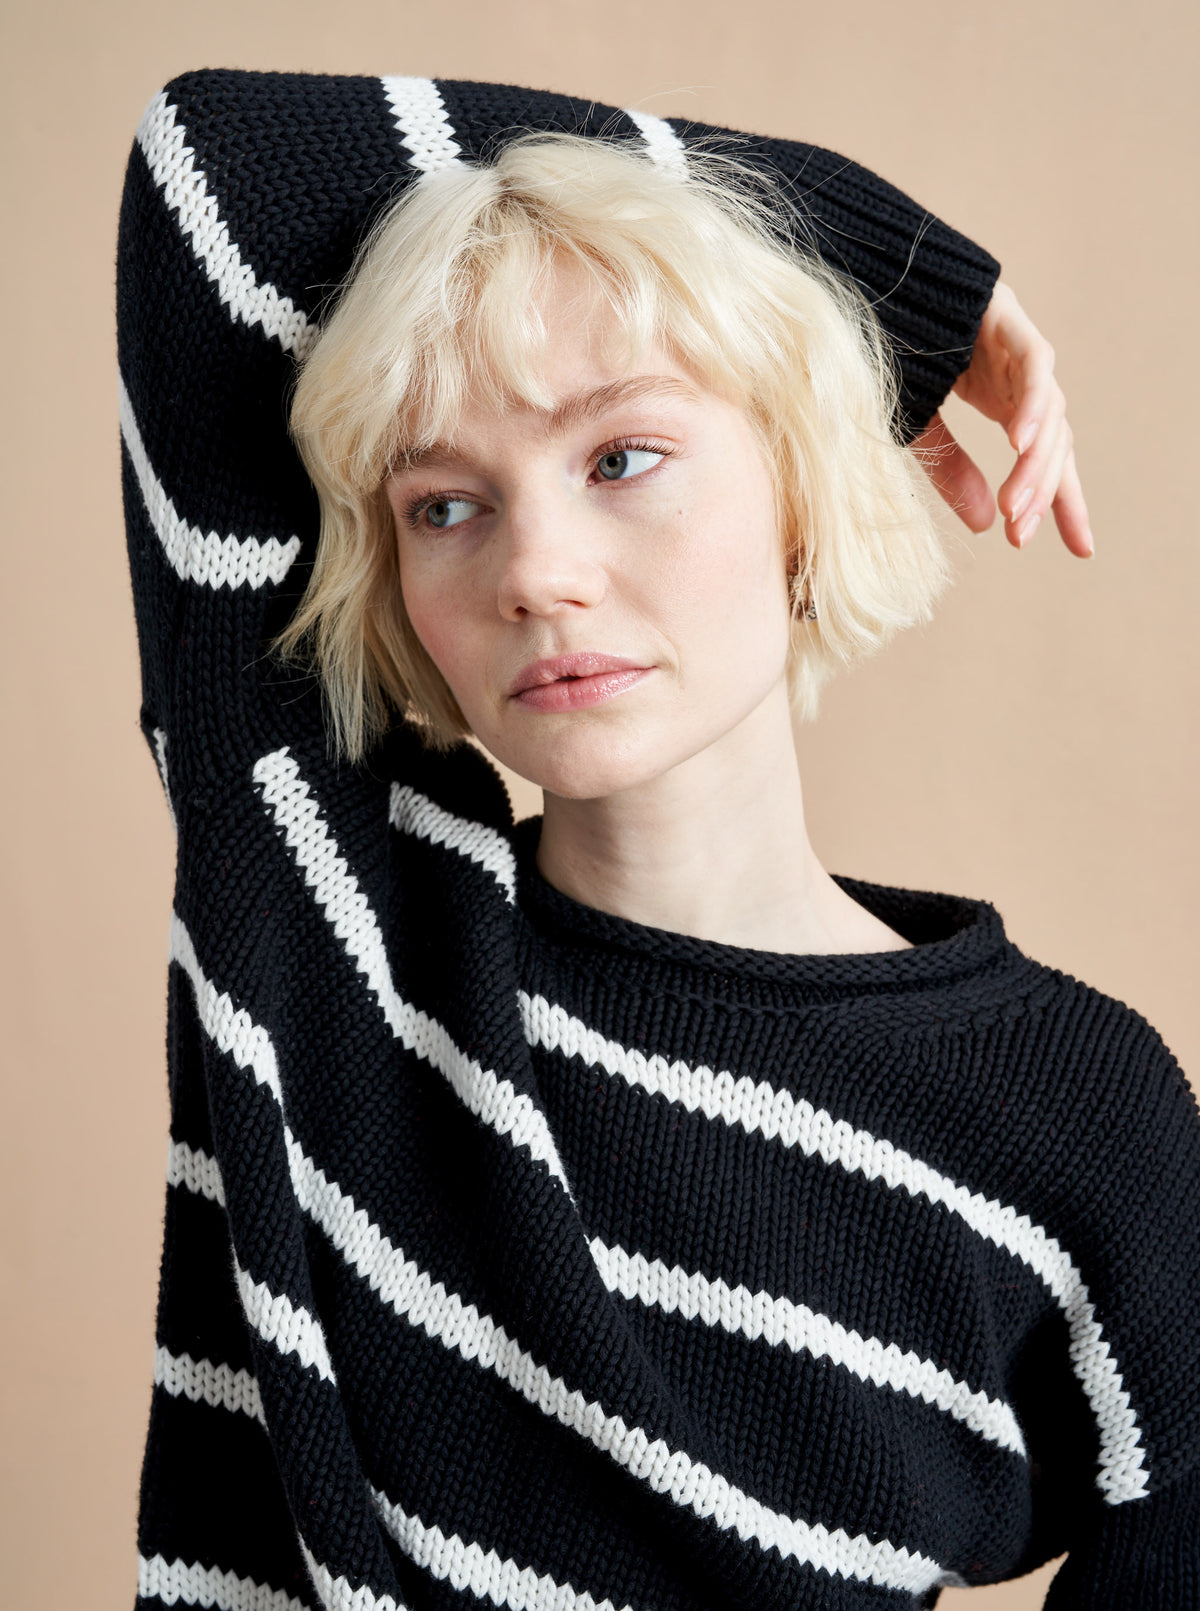 Your favorite Marin Sweater now in comfy cotton. Our newest member of the sweater family features a rollneck in that oversize, chunky weight you know and love us for.